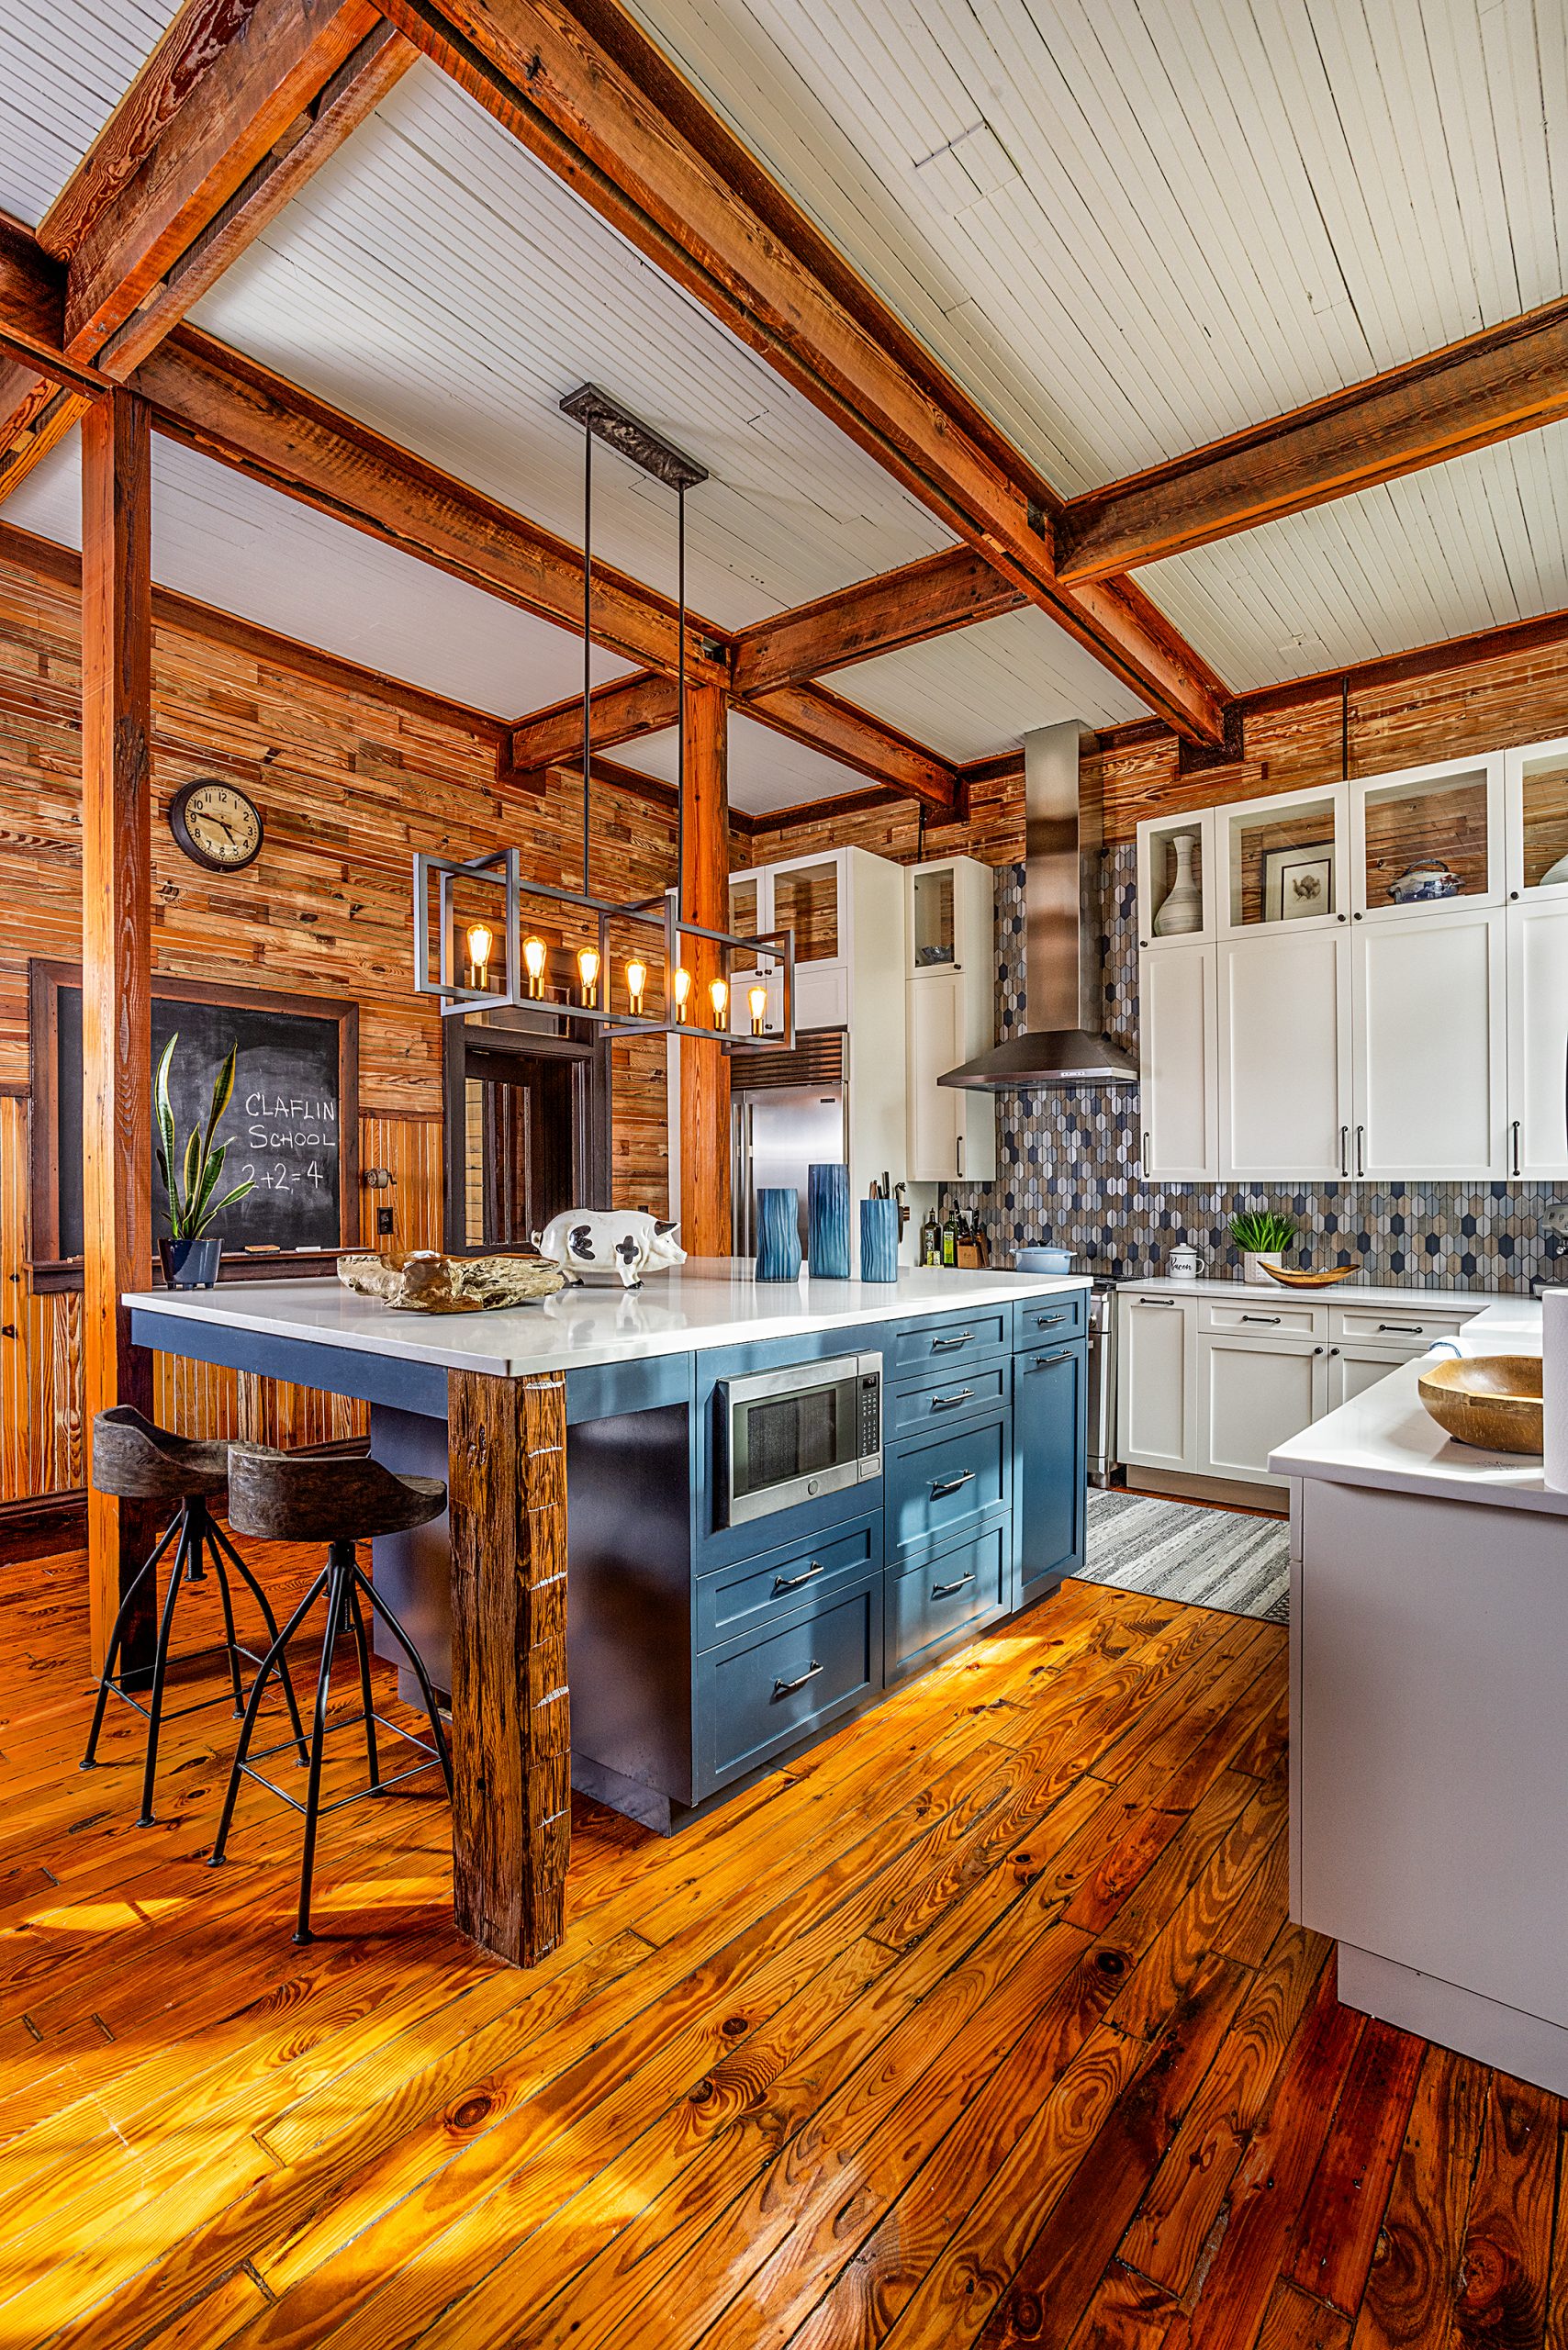  The kitchen is a chef’s dream with high-end appliances, a muted blue slate color scheme, a farm sink, and a massive island with quartz countertops. In honor of the building’s roots as an old schoolhouse, Ben installed a blackboard with chalk and an old-timey pencil sharpener.